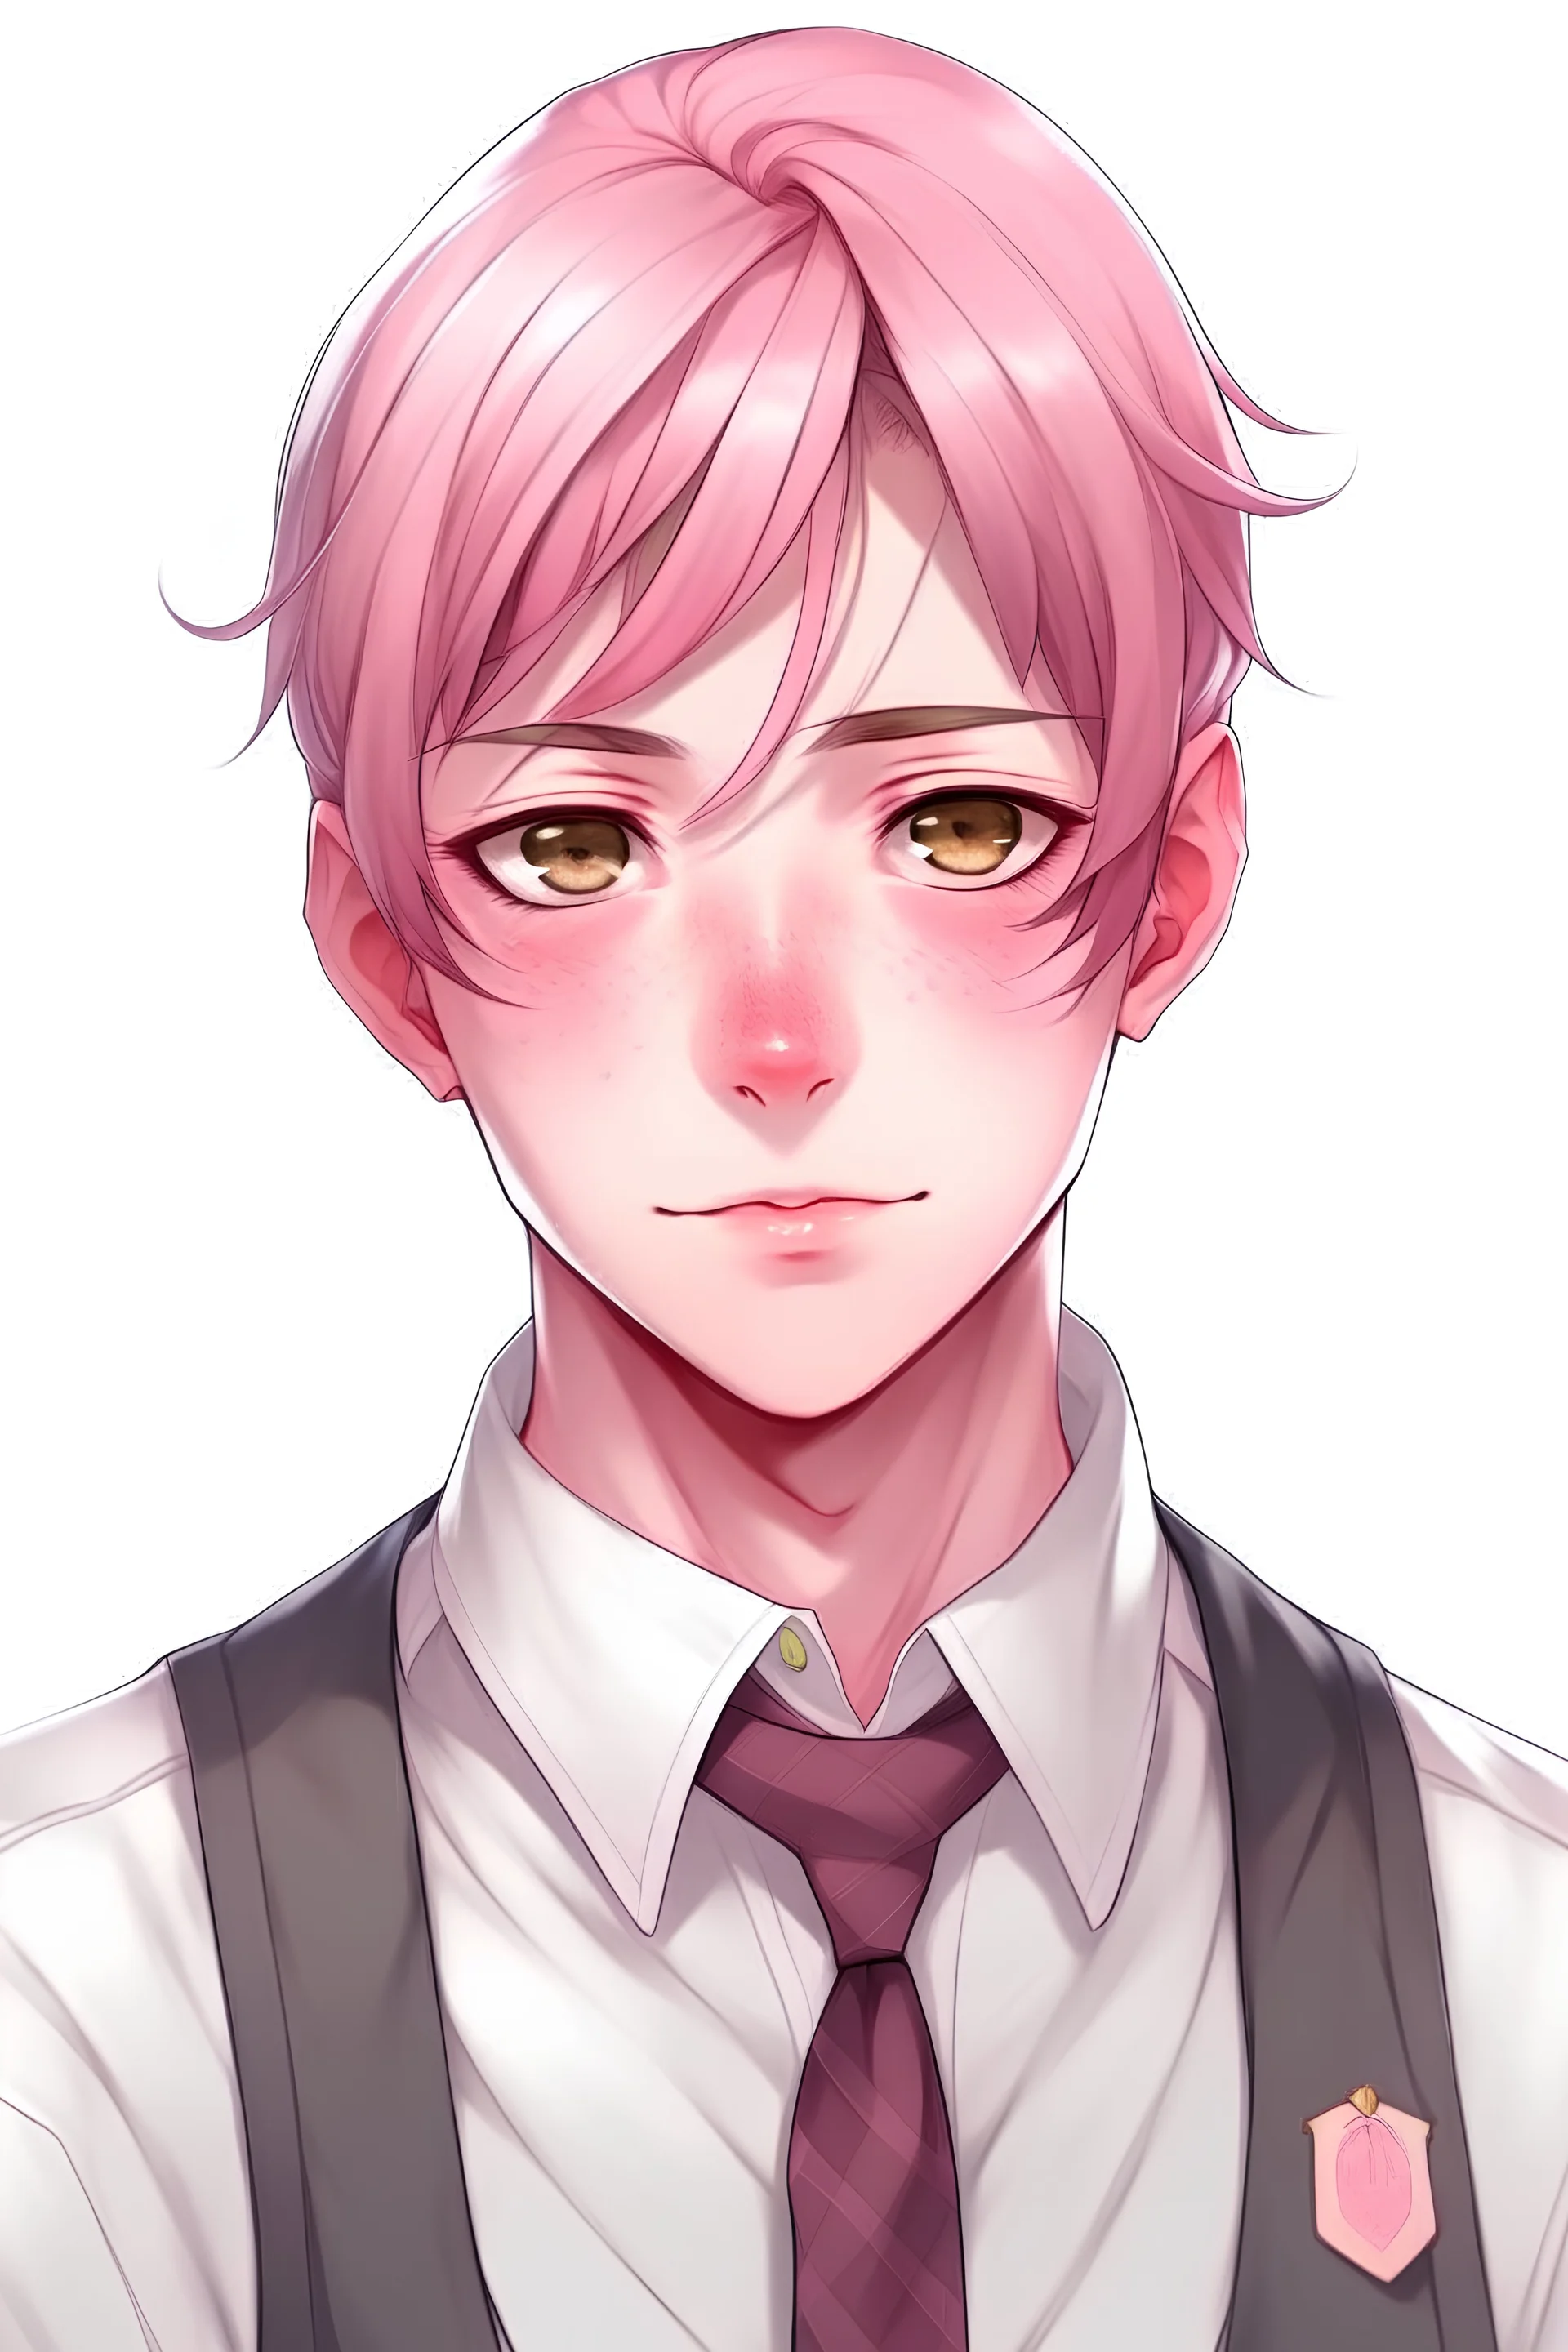 pink haired man with pale skin and brown eyes wearing a school uniform